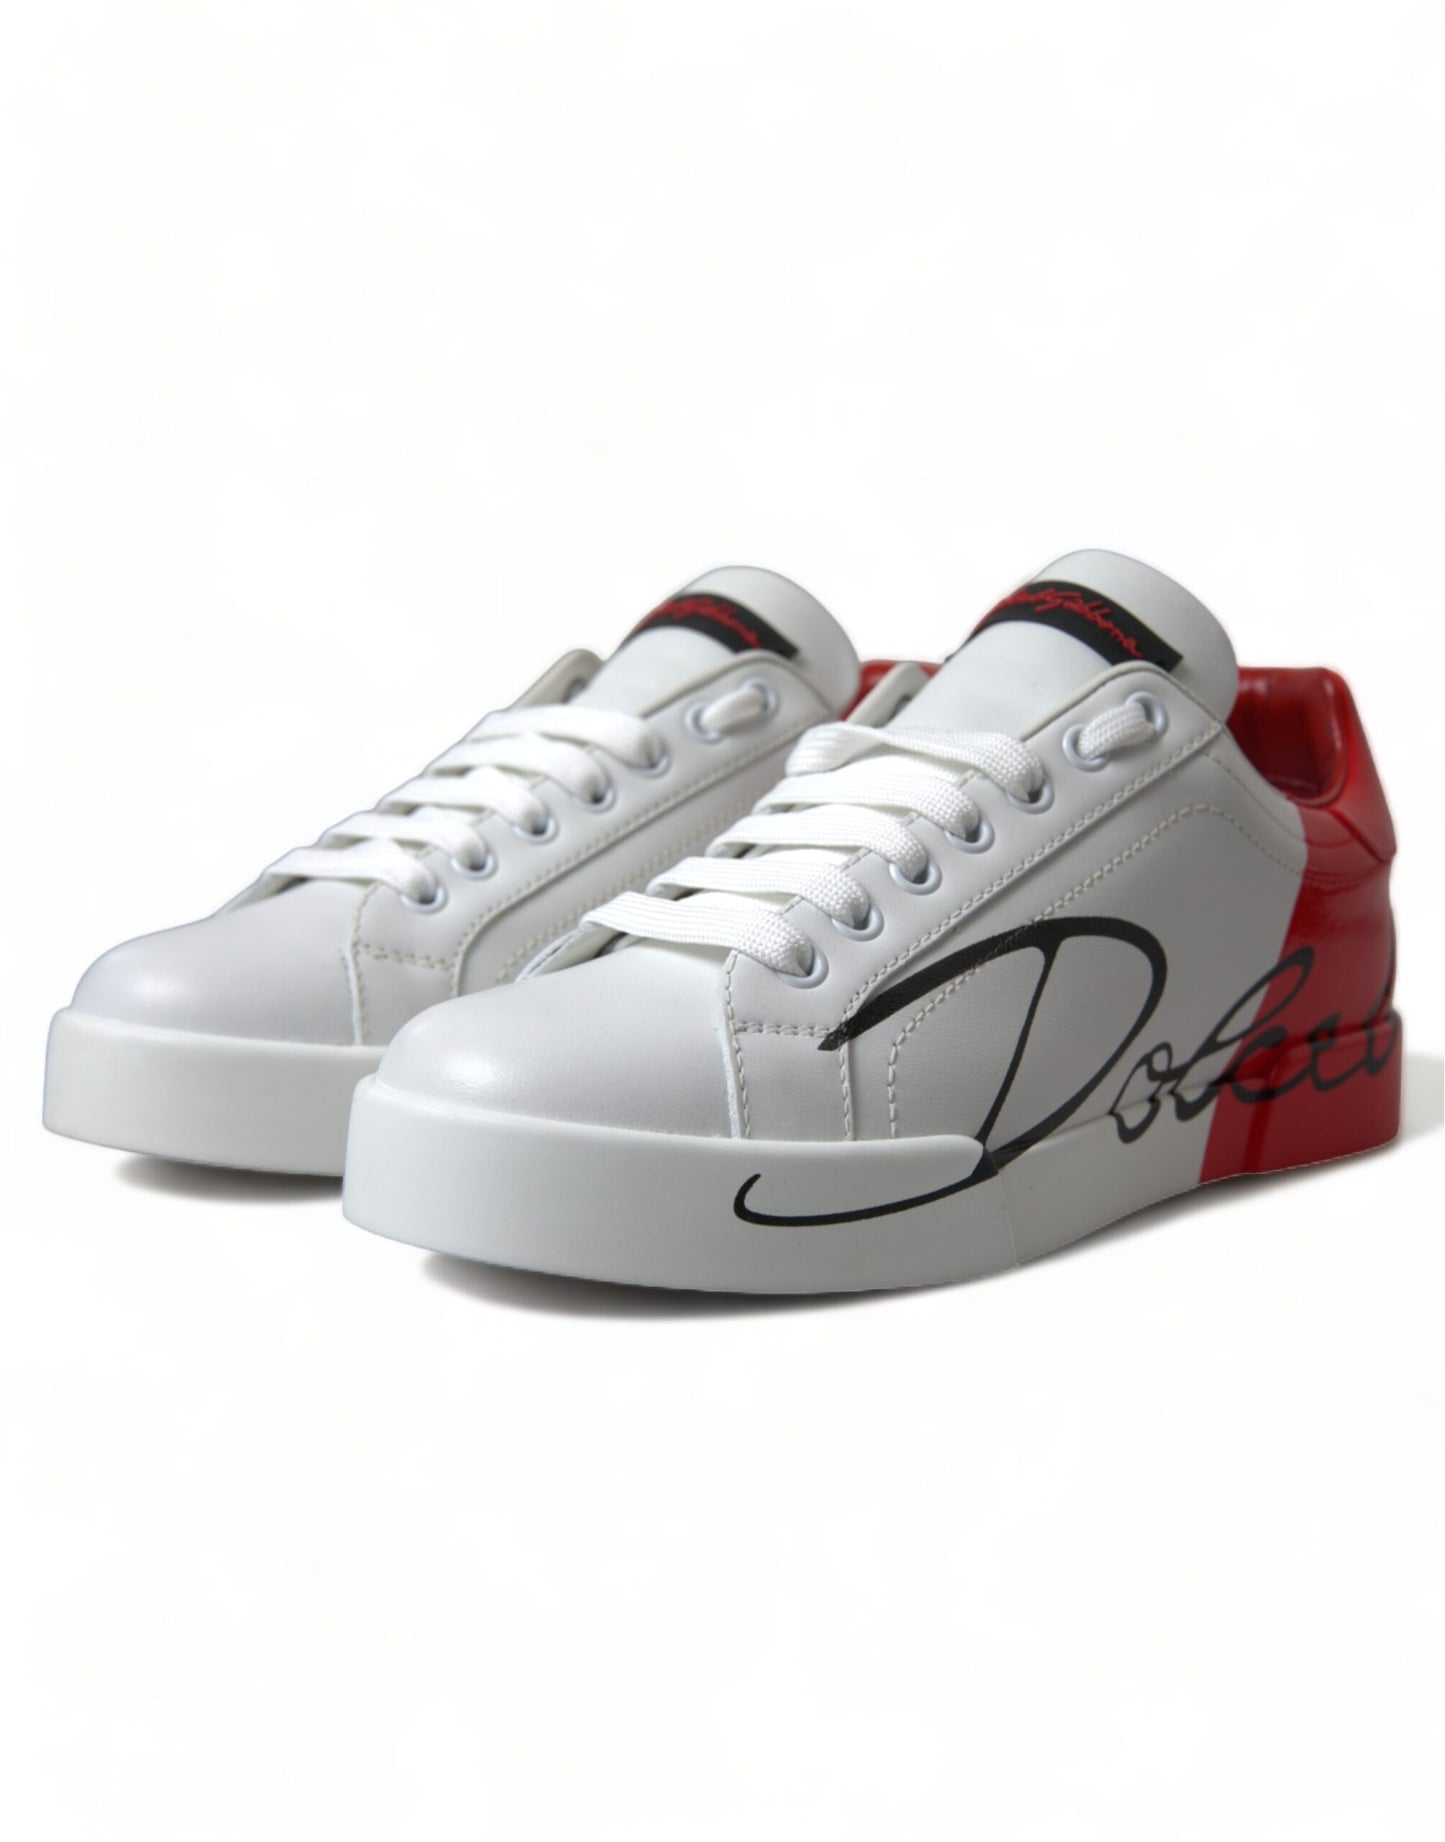 Dolce & Gabbana White Red Lace Up Womens Low Top Sneakers Shoes - DEA STILOSA MILANO